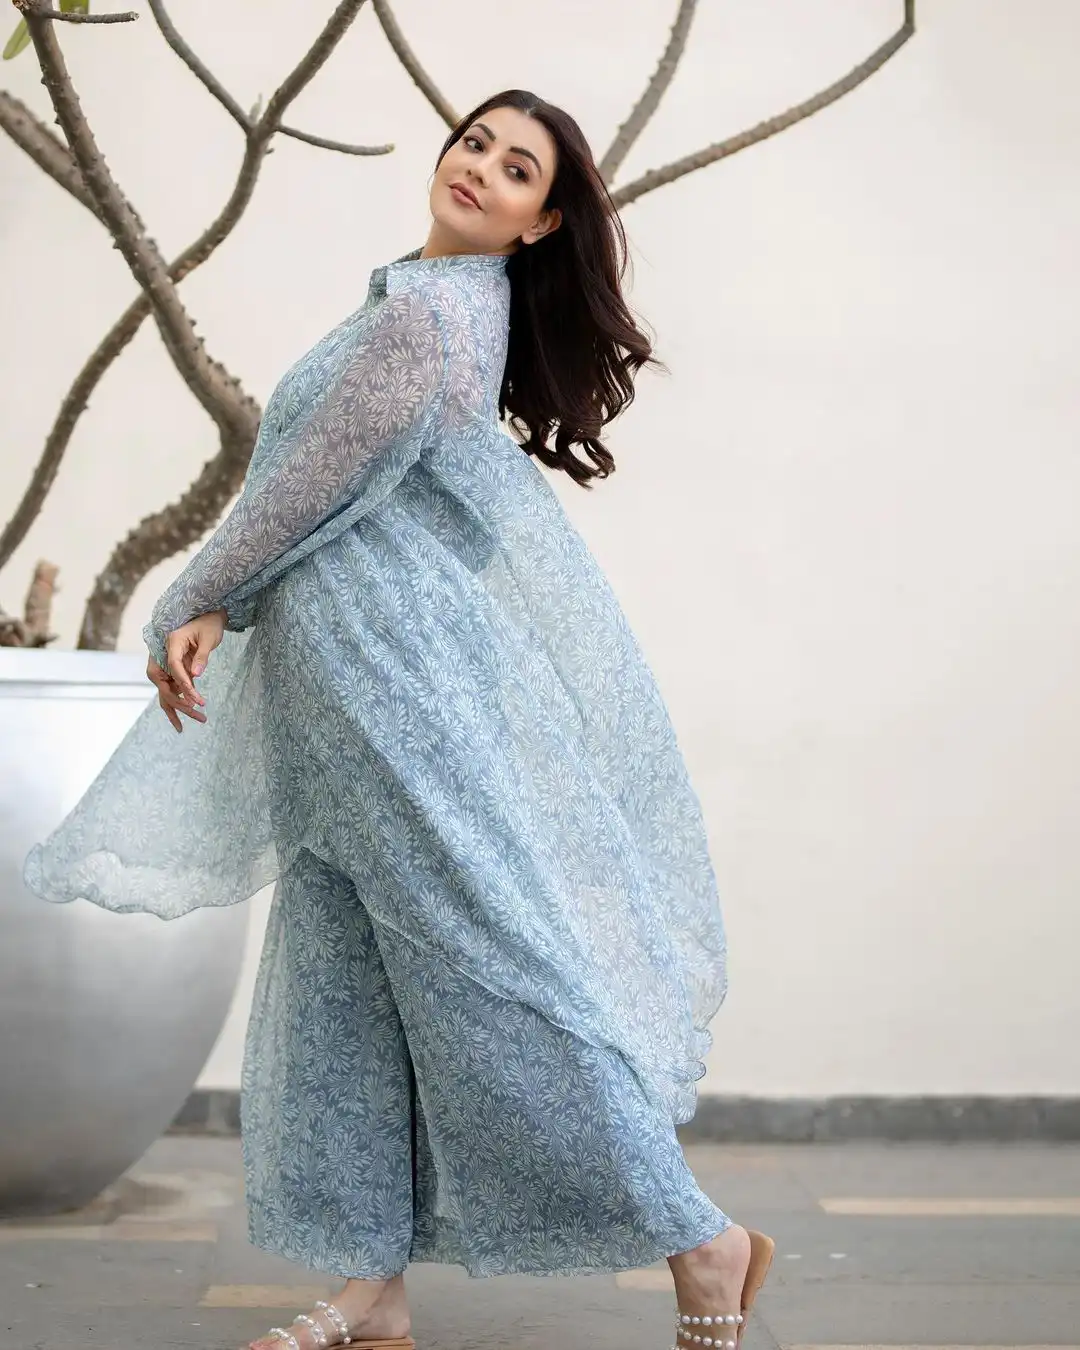 Kajal Aggarwal special photoshoot for Ghosty movie